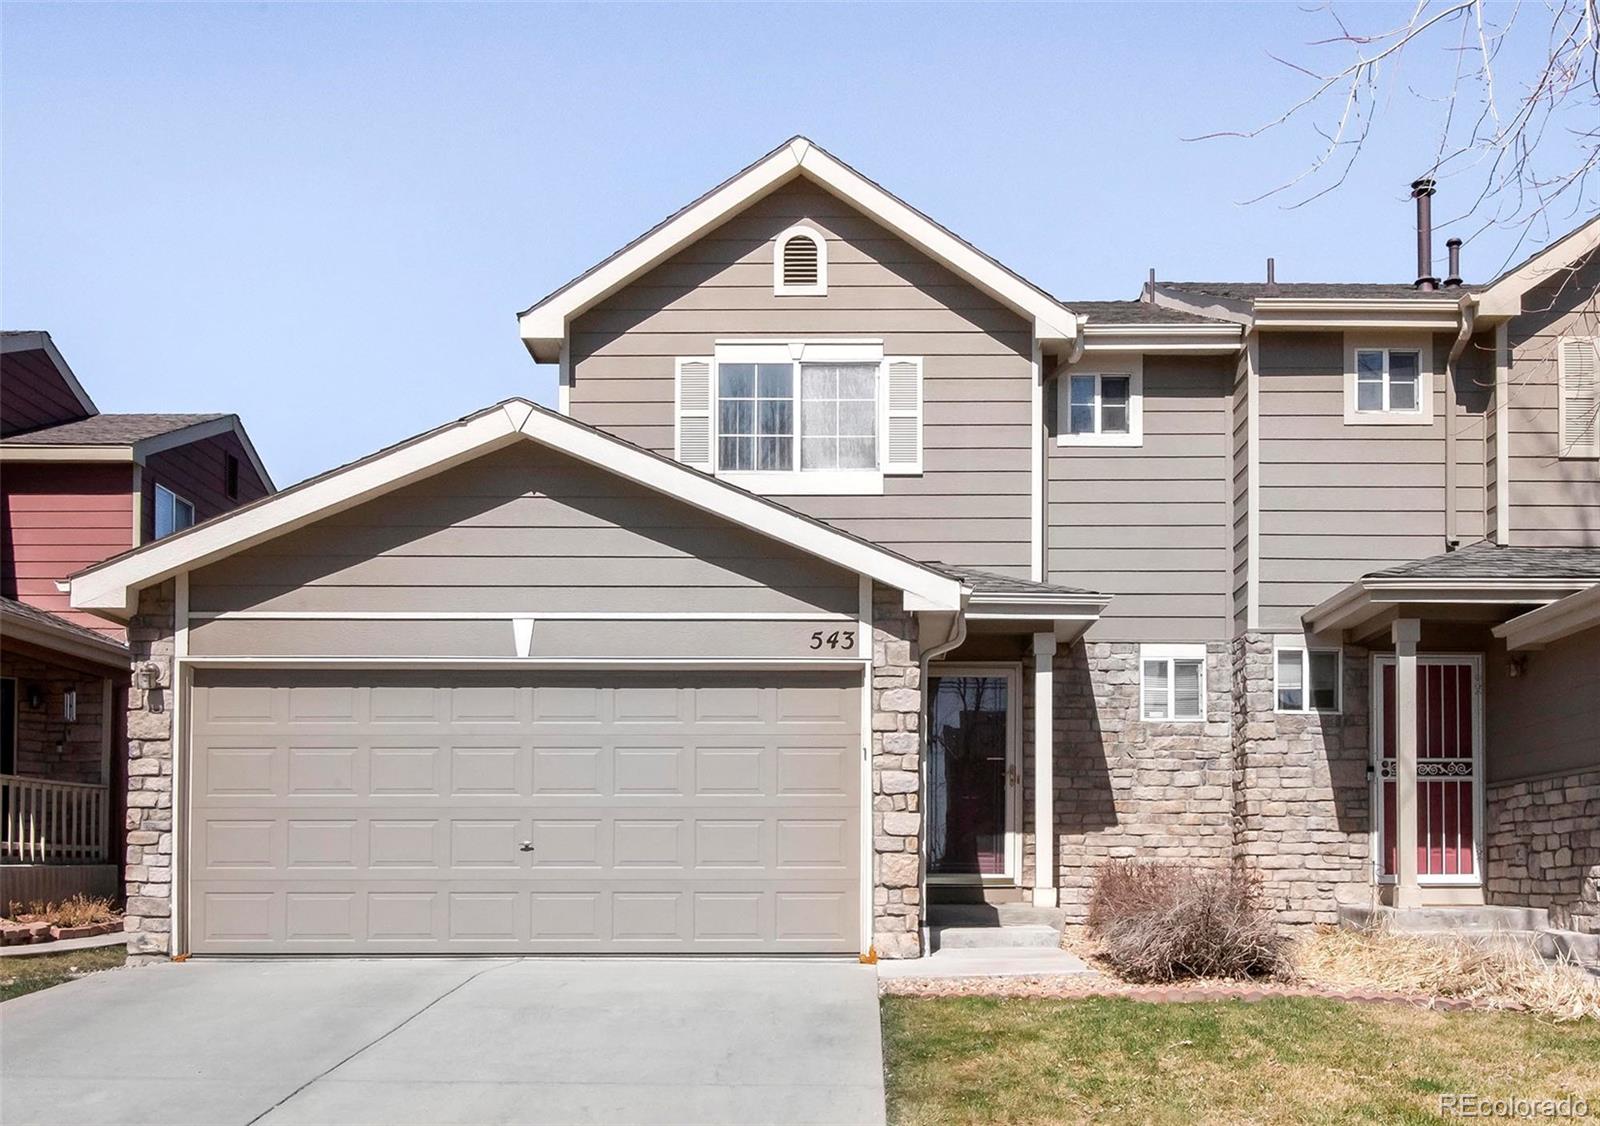 543 w 91st drive, thornton sold home. Closed on 2024-04-24 for $436,000.